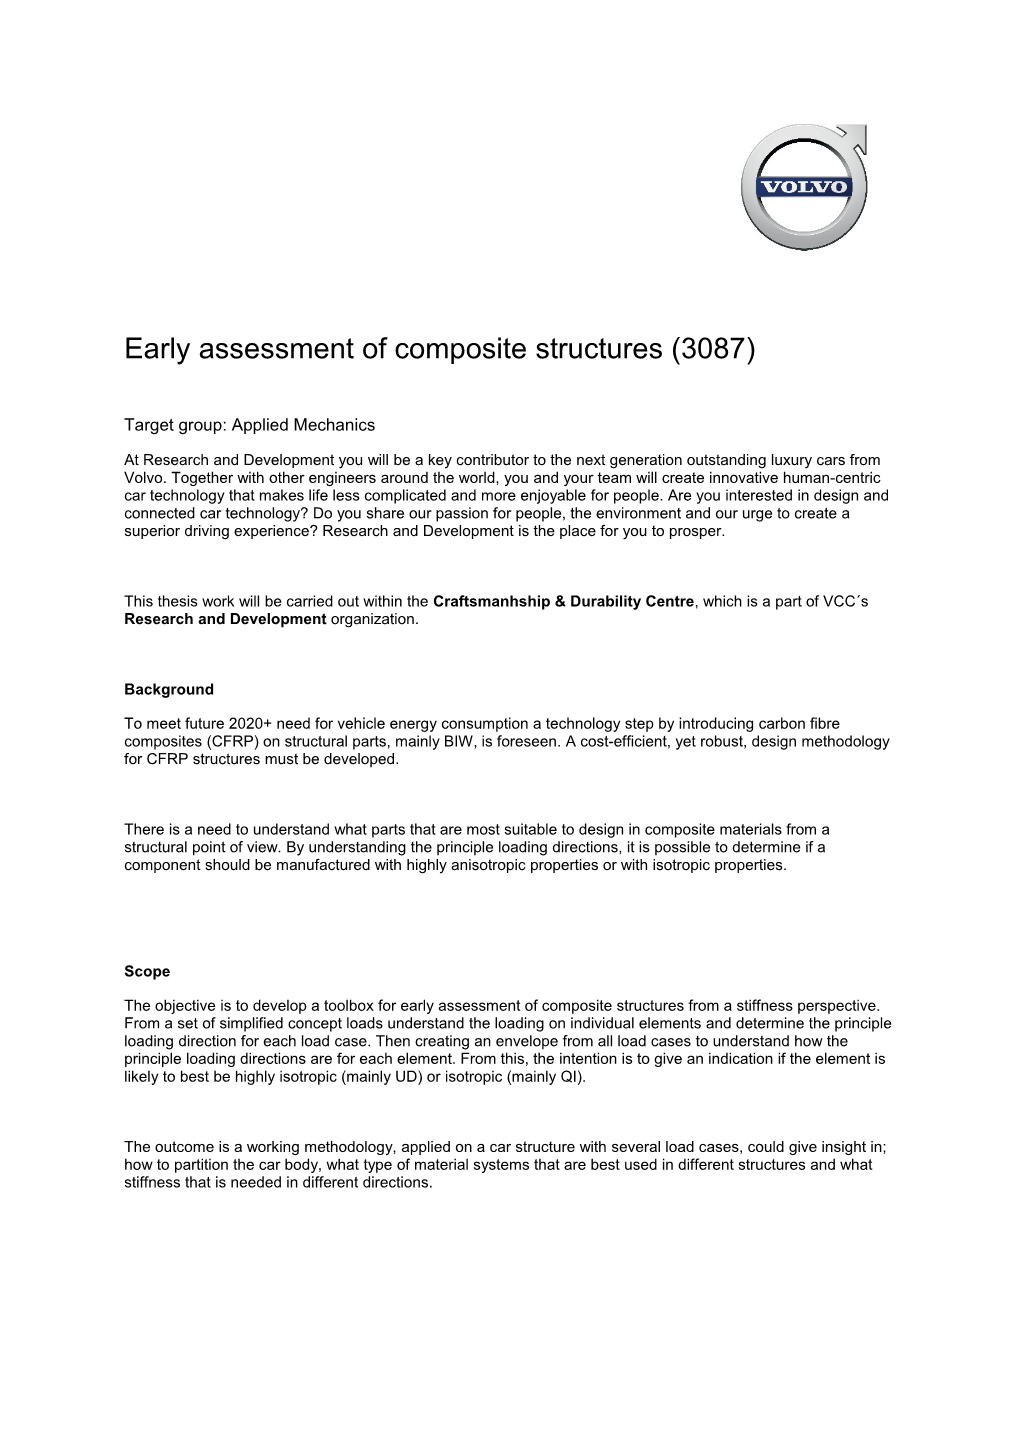 Early Assessment of Composite Structures (3087)